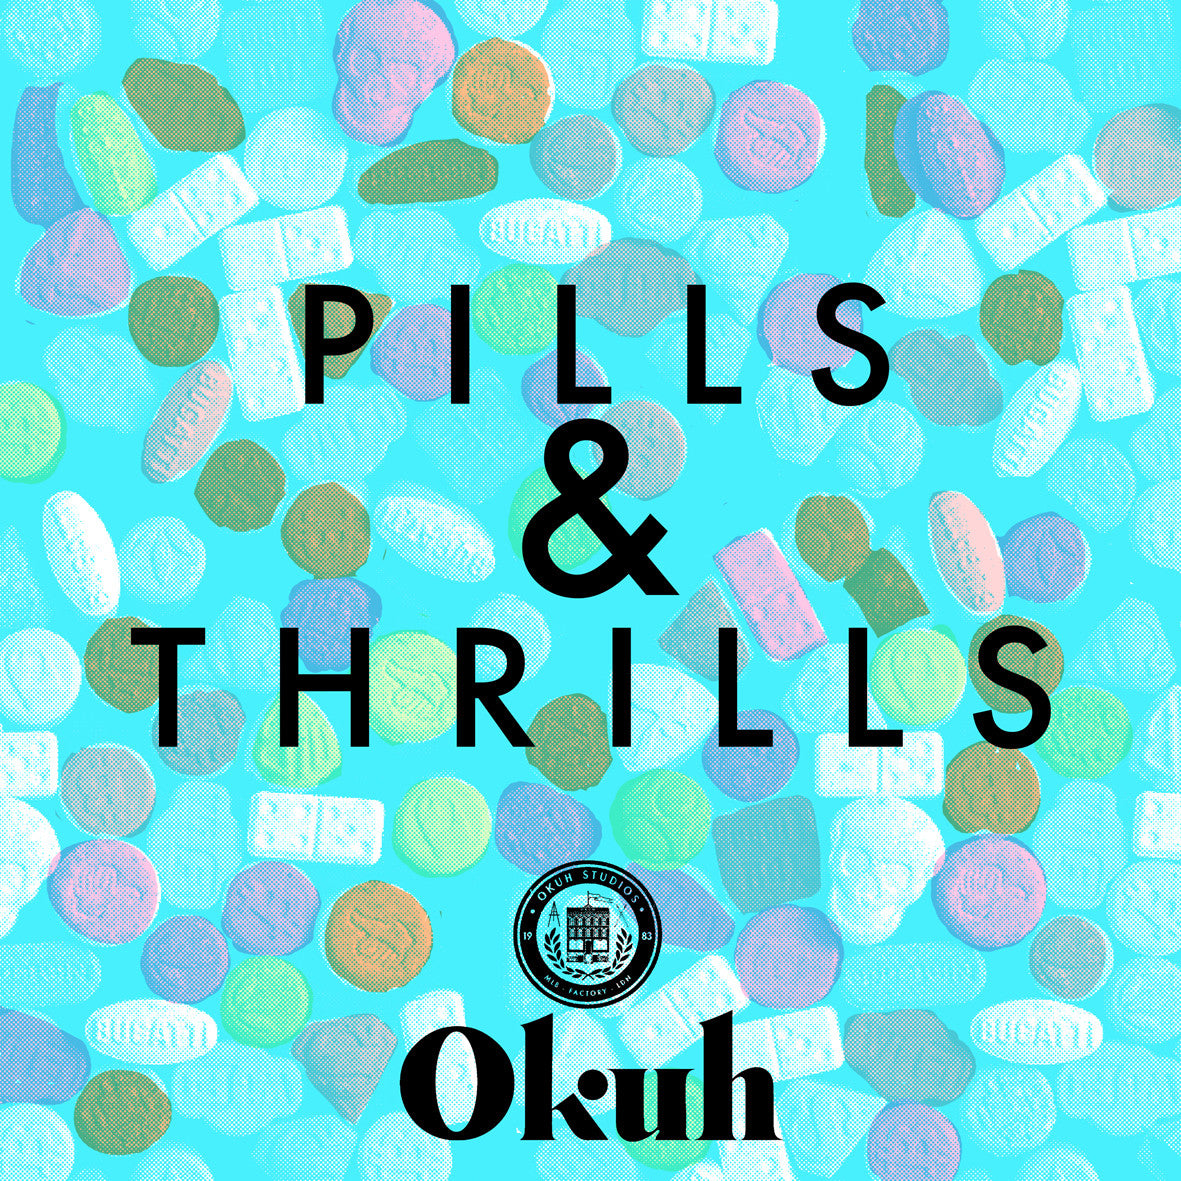 Pills and Thrills - The rise of 'E'